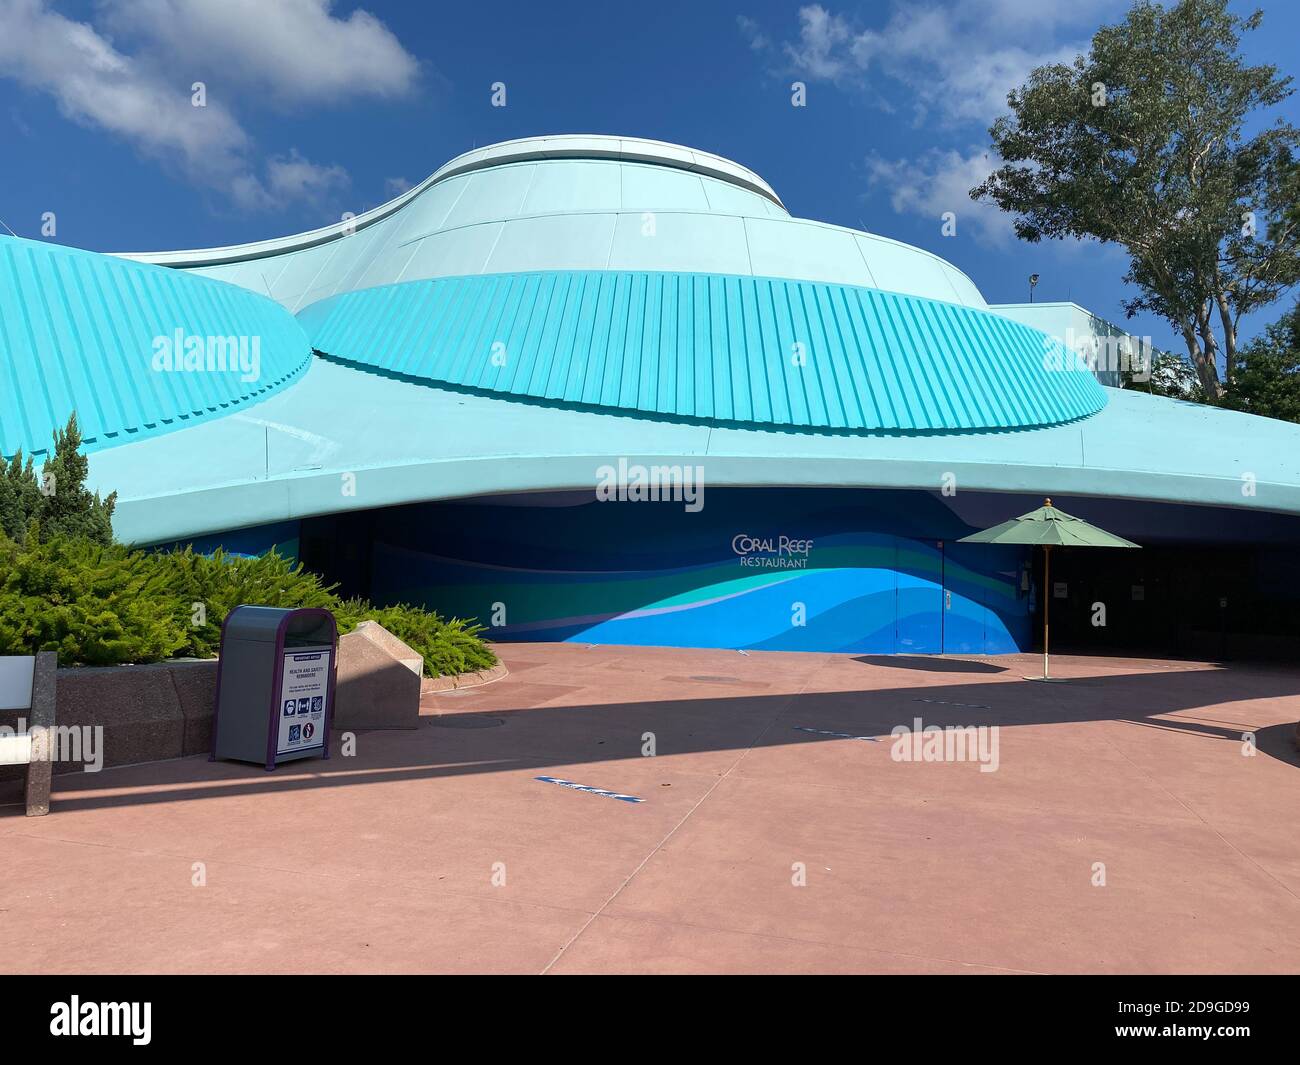 Orlando, FL/USA - 10/14/20:  The exterior of the Coral Reef restaurant at the Living Seas Pavillion in EPCOT at Walt Disney World. Stock Photo